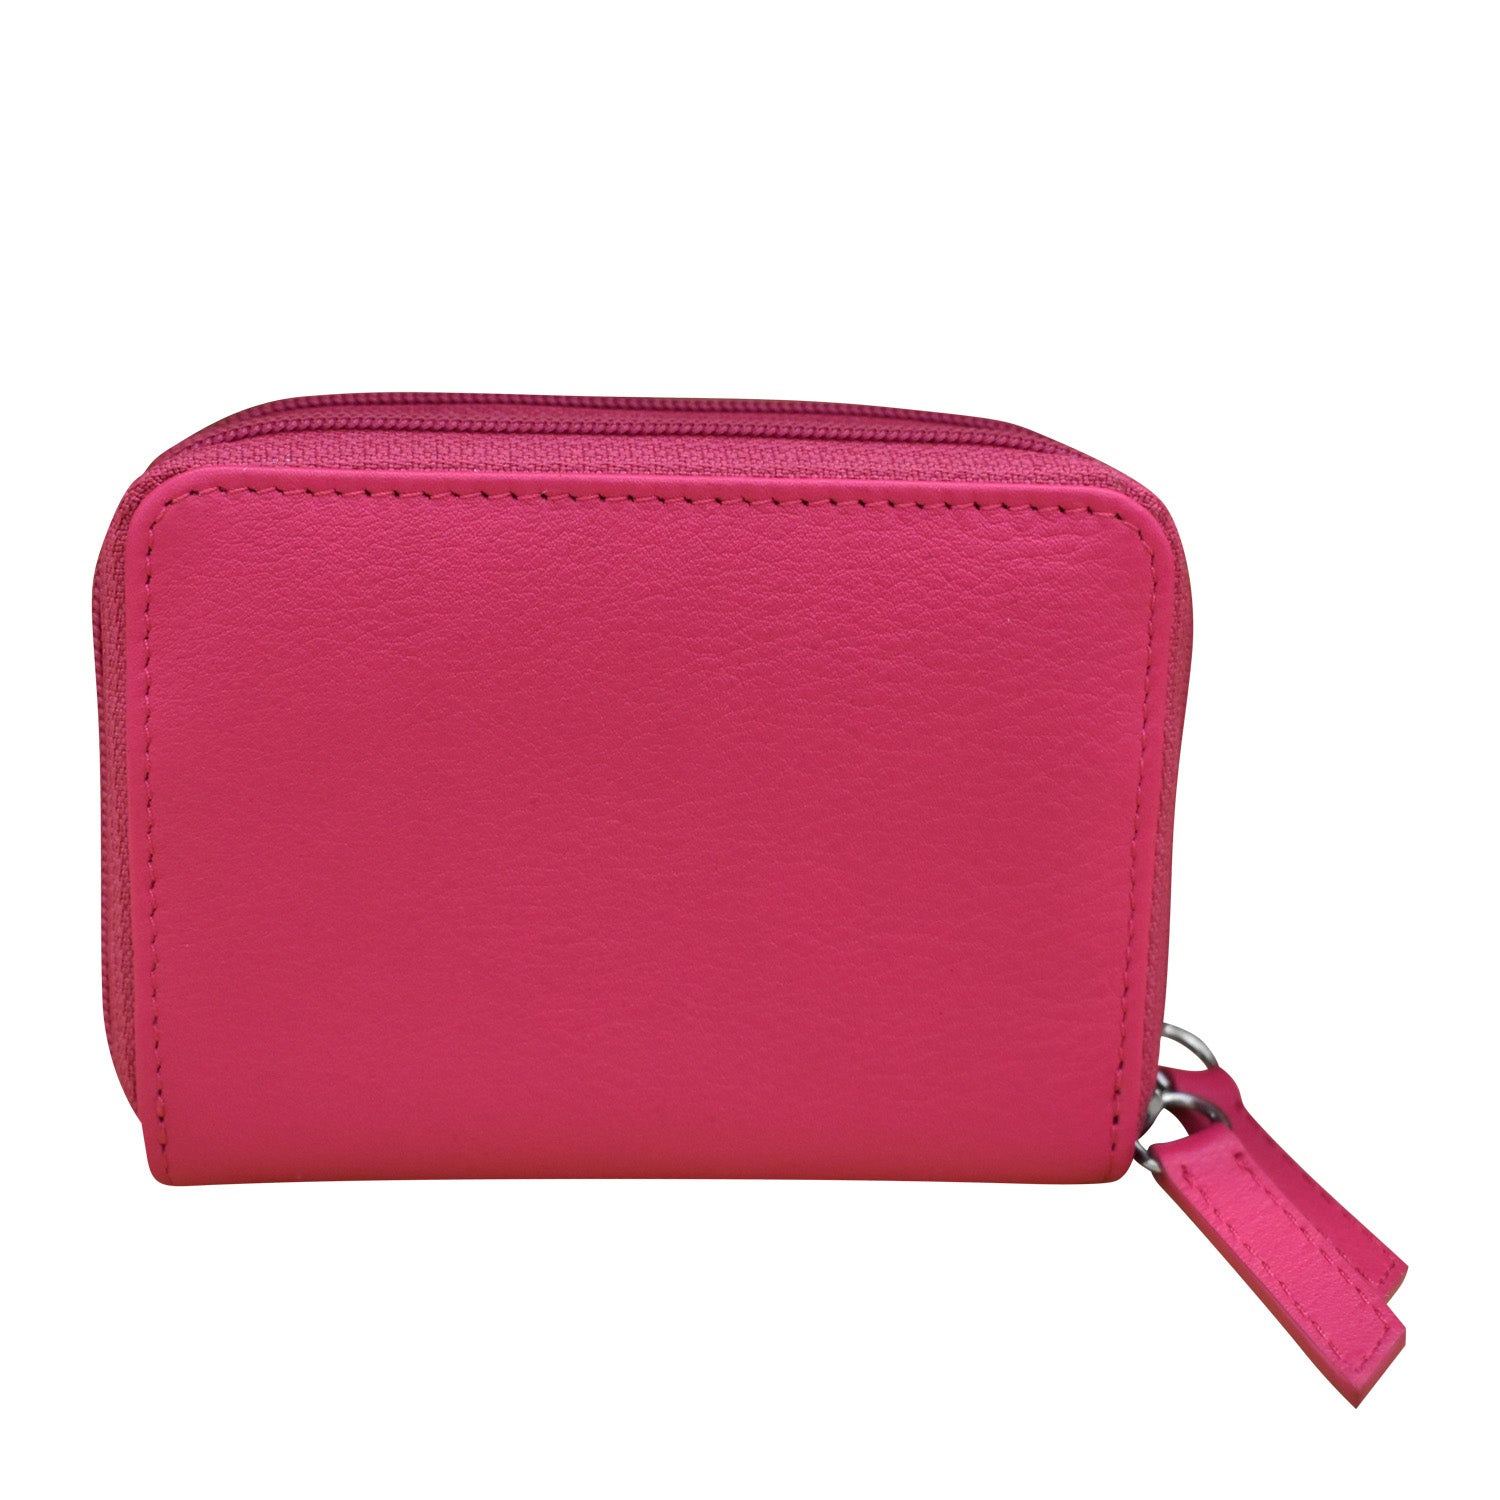 Buy the Kate Spade New York Double Zip Crossbody Purse Bag in Coral Leather